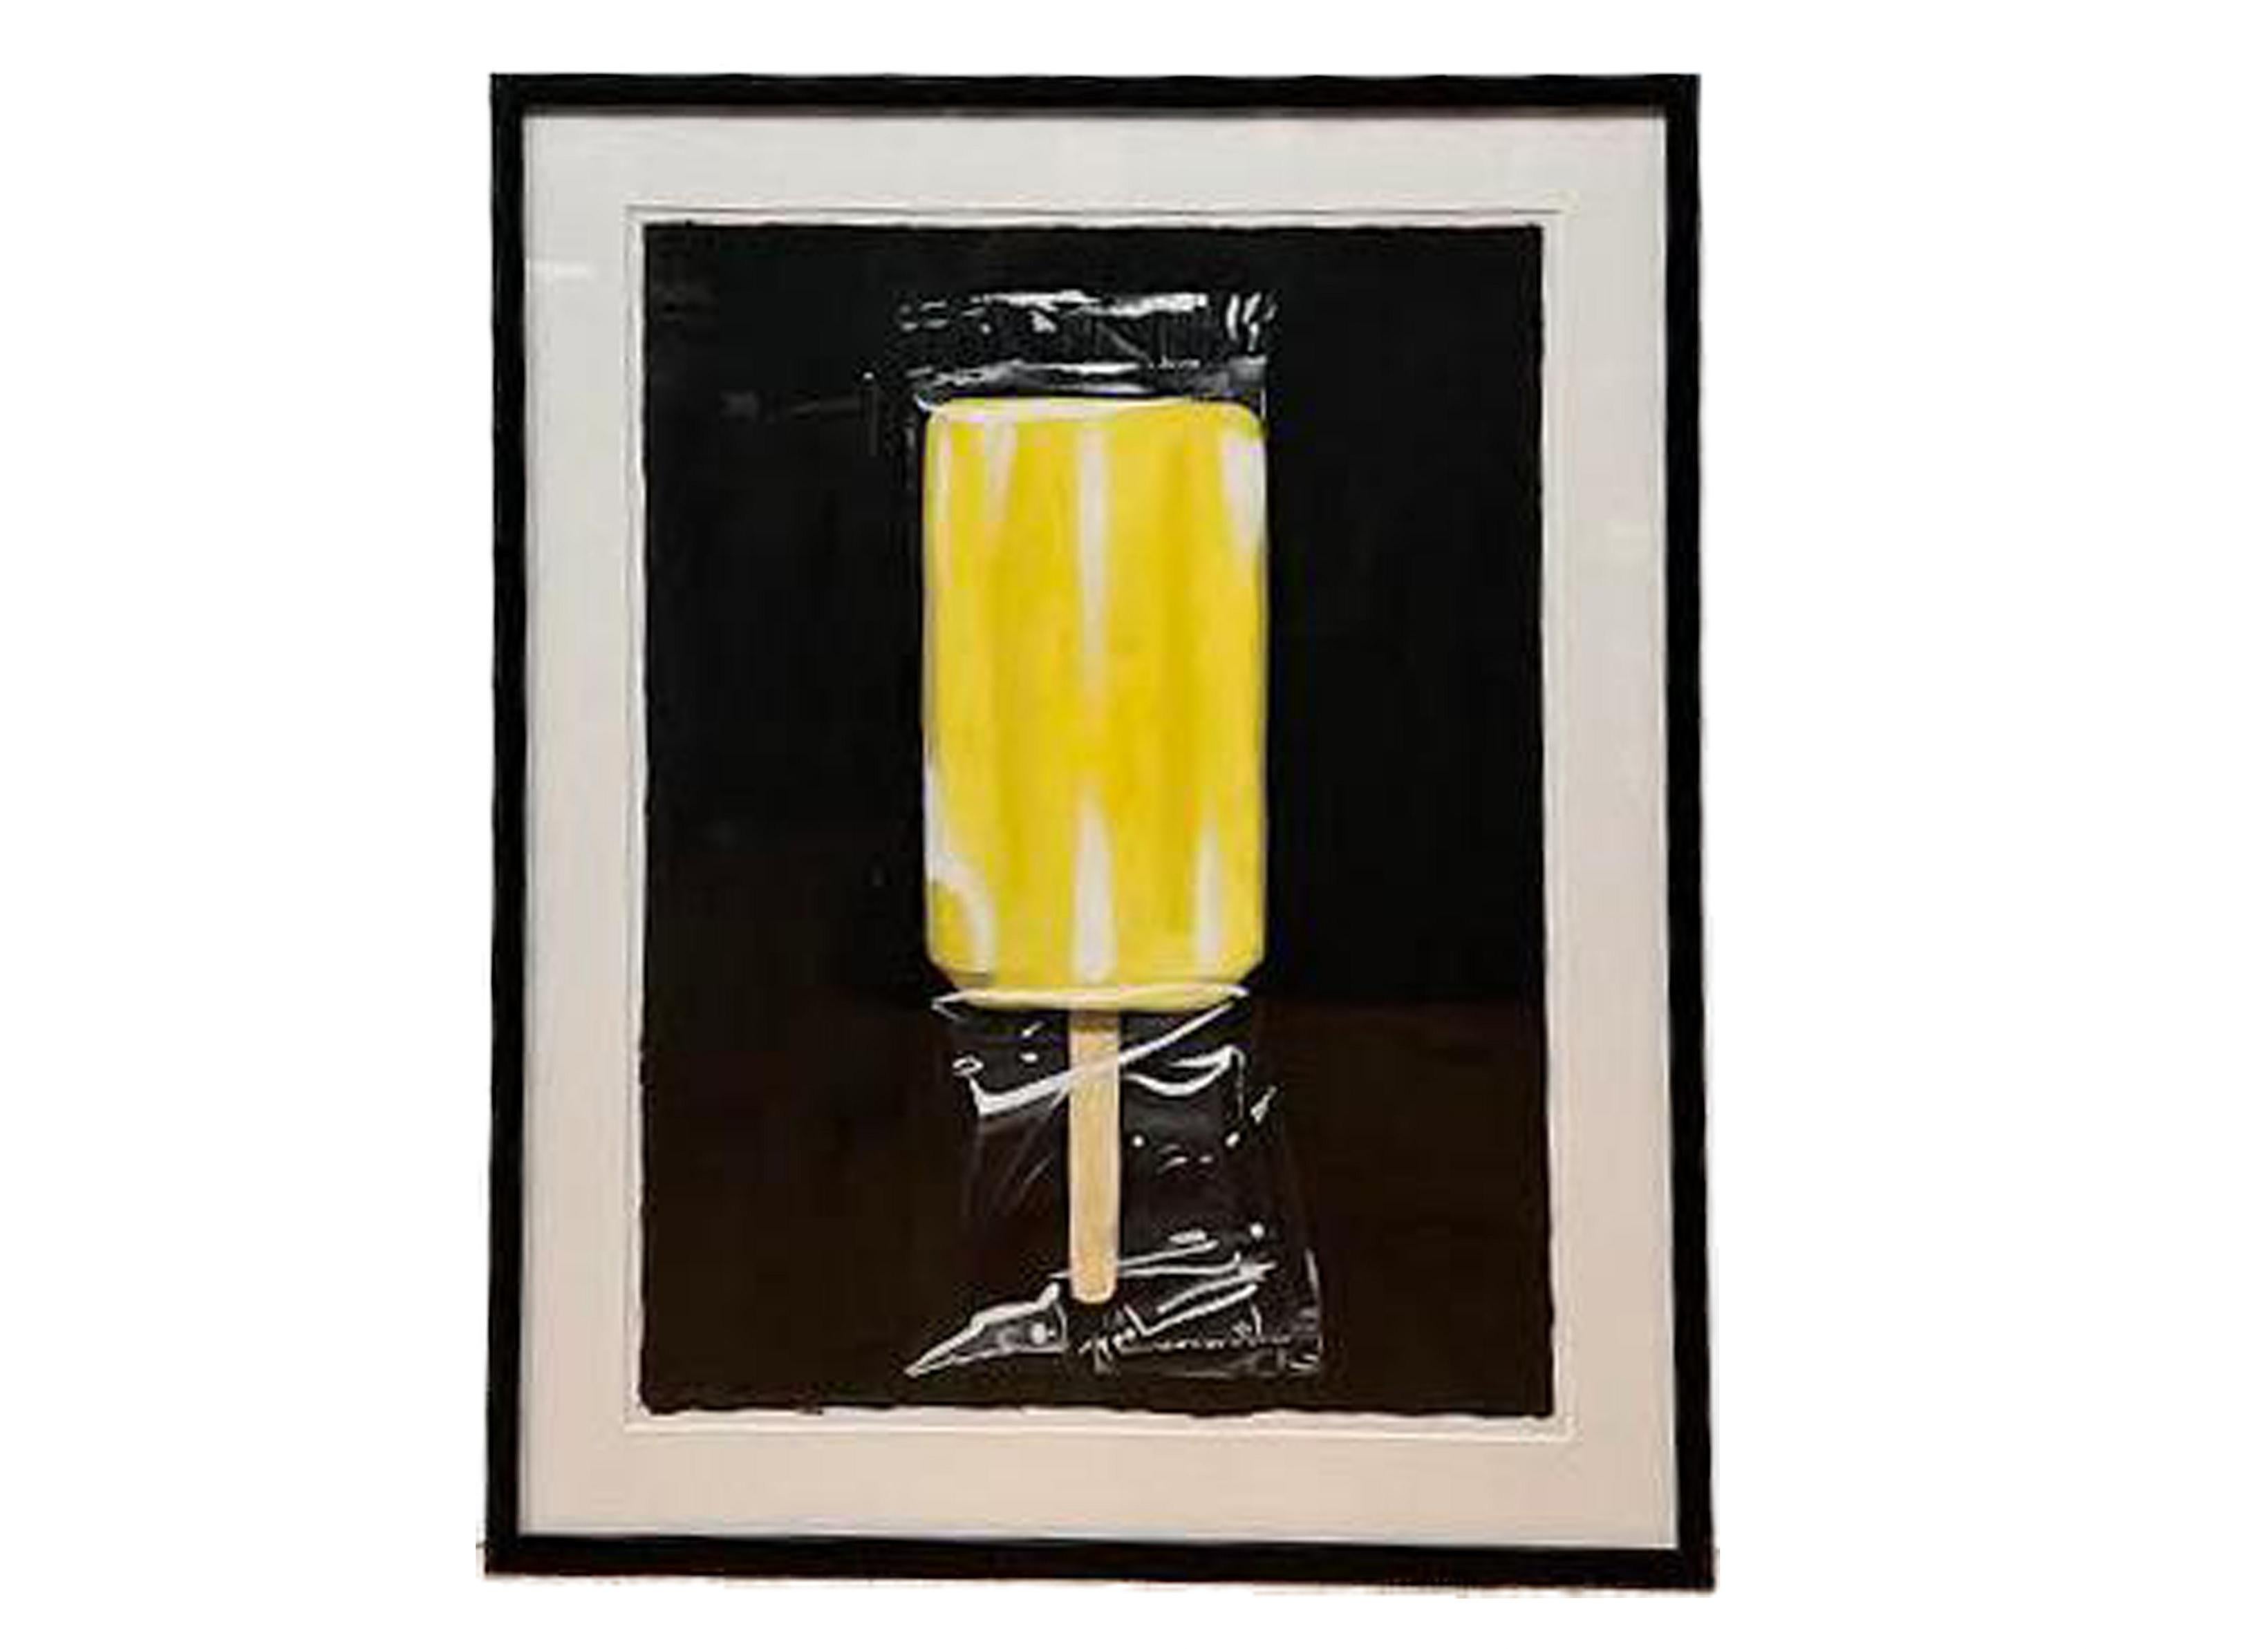 Christopher Mark Brennan Figurative Painting - "LIFE and DEATH of a Yellow Popsicle" Acrylic Painting by Mark Brennan